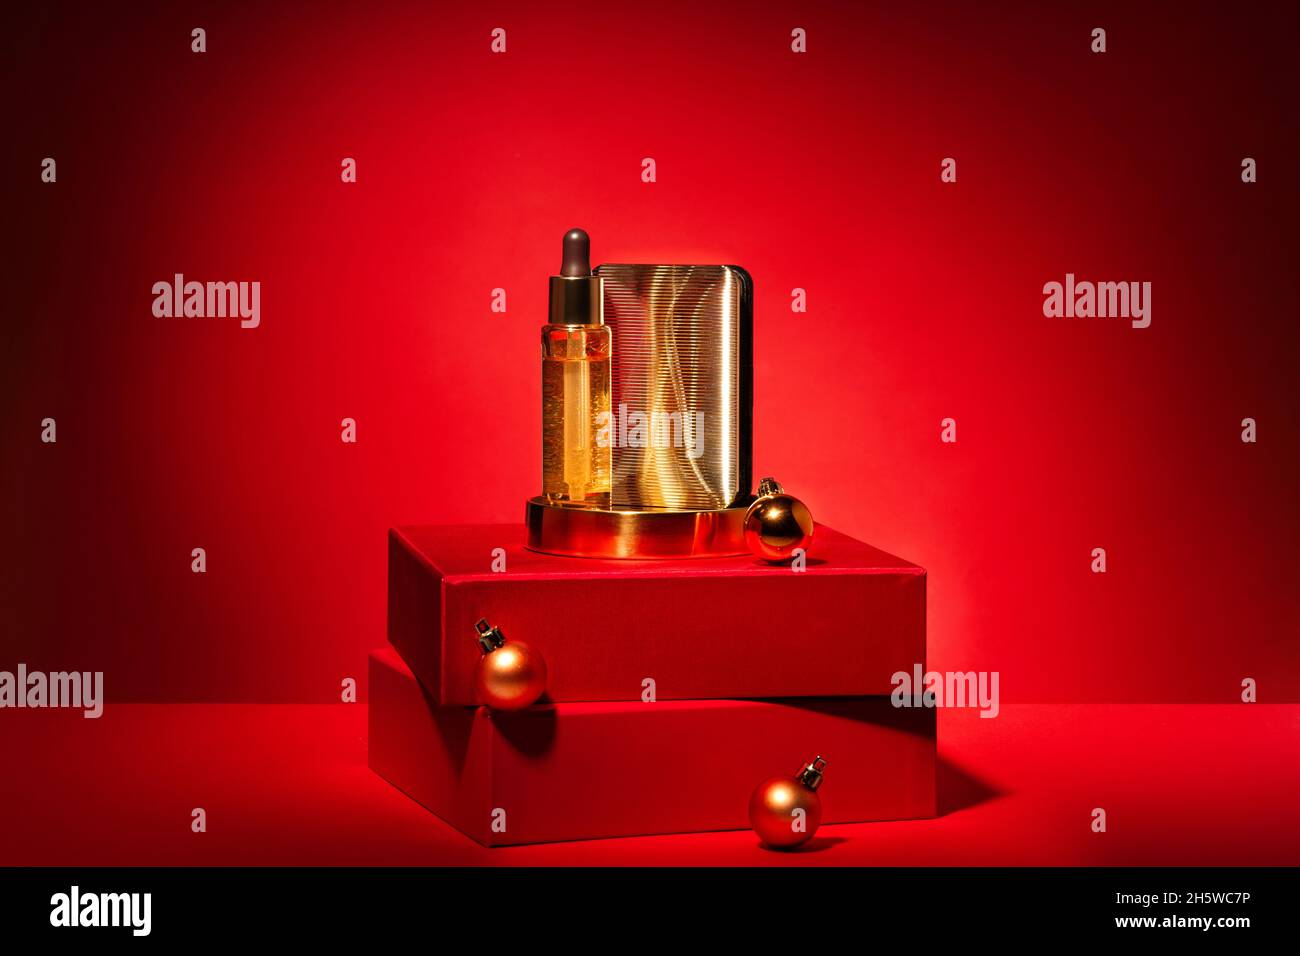 Gold cosmetics on a red podium with gift boxes and decor on a red background. Pedestal, showcase with luxury cosmetics. Holiday advertising concept fo Stock Photo